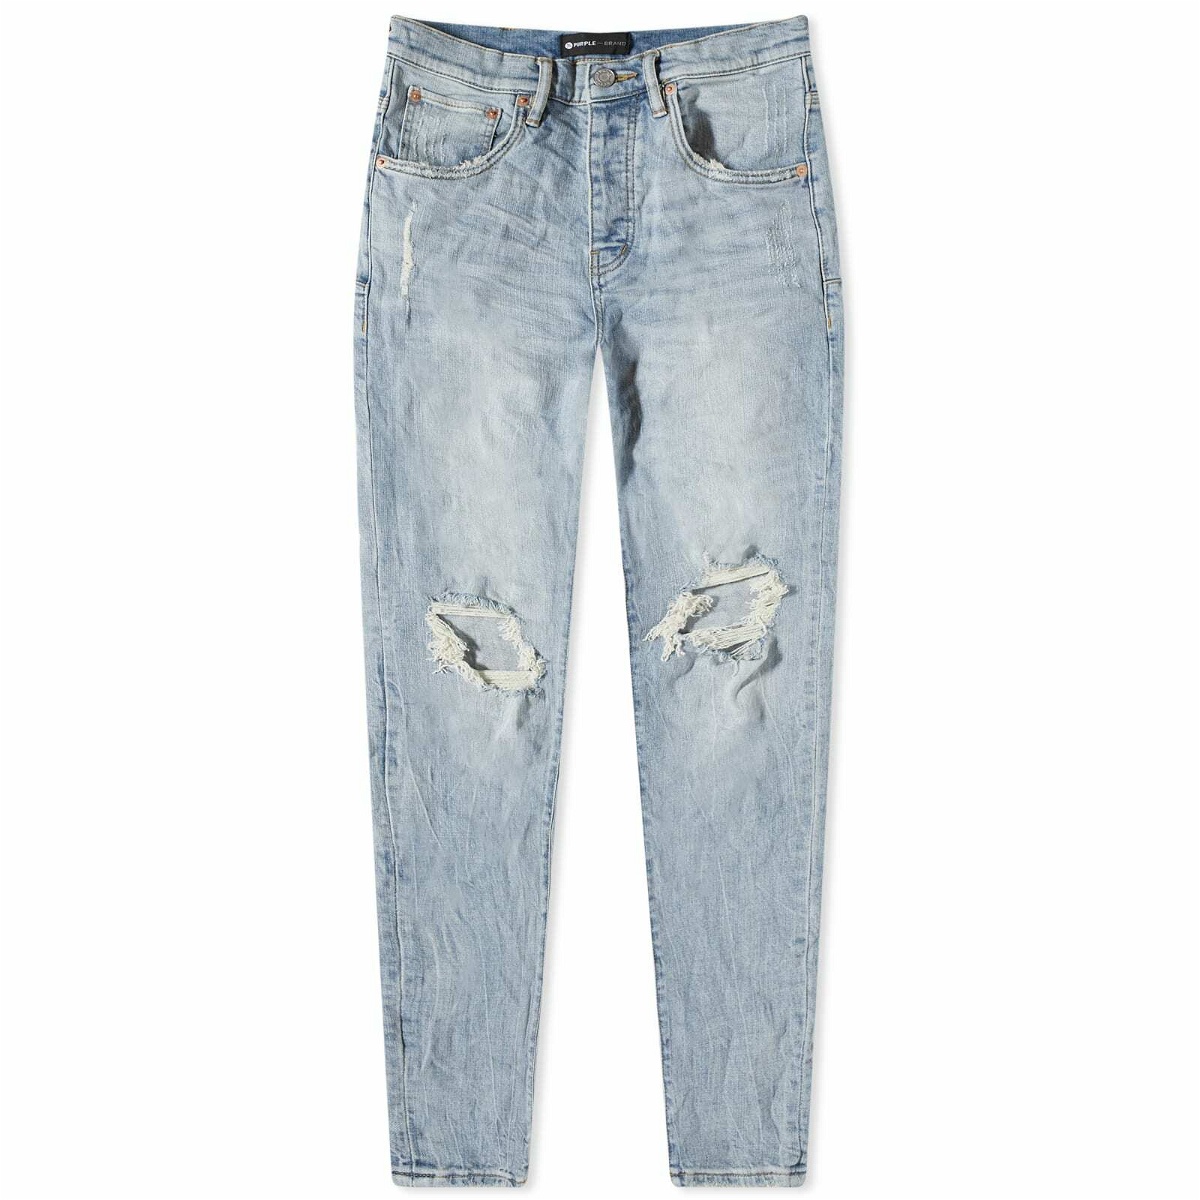 Purple-Brand Jeans - Faded Distressed and Ripped - Light Indigo